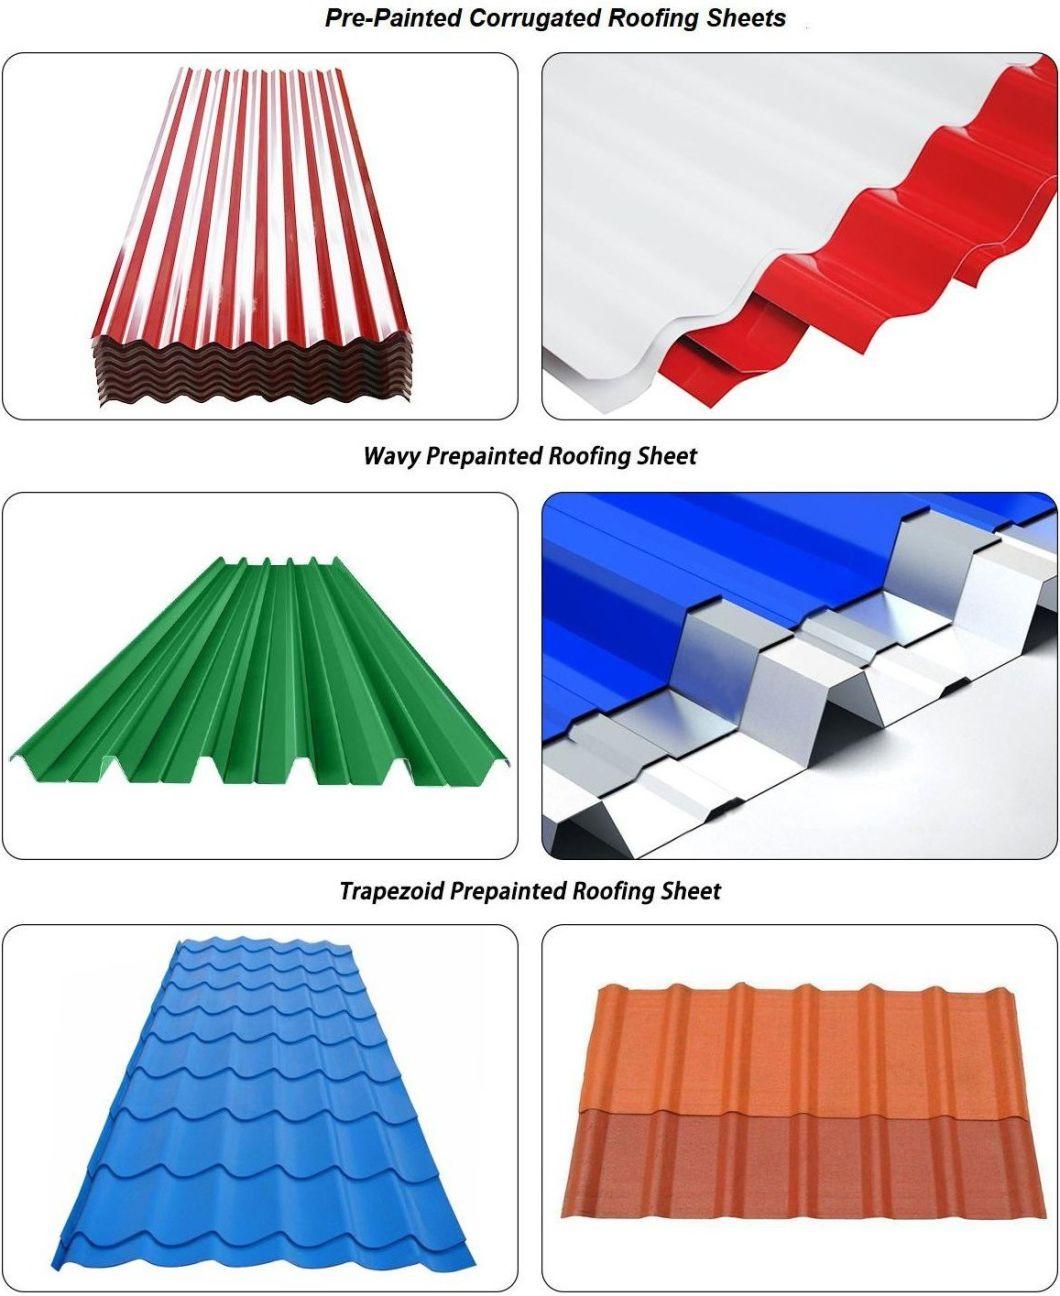 JIS AISI 0.12-2.0mm*600-1250mm Building Material Iron Price Steel Roofing Sheet with Good Service